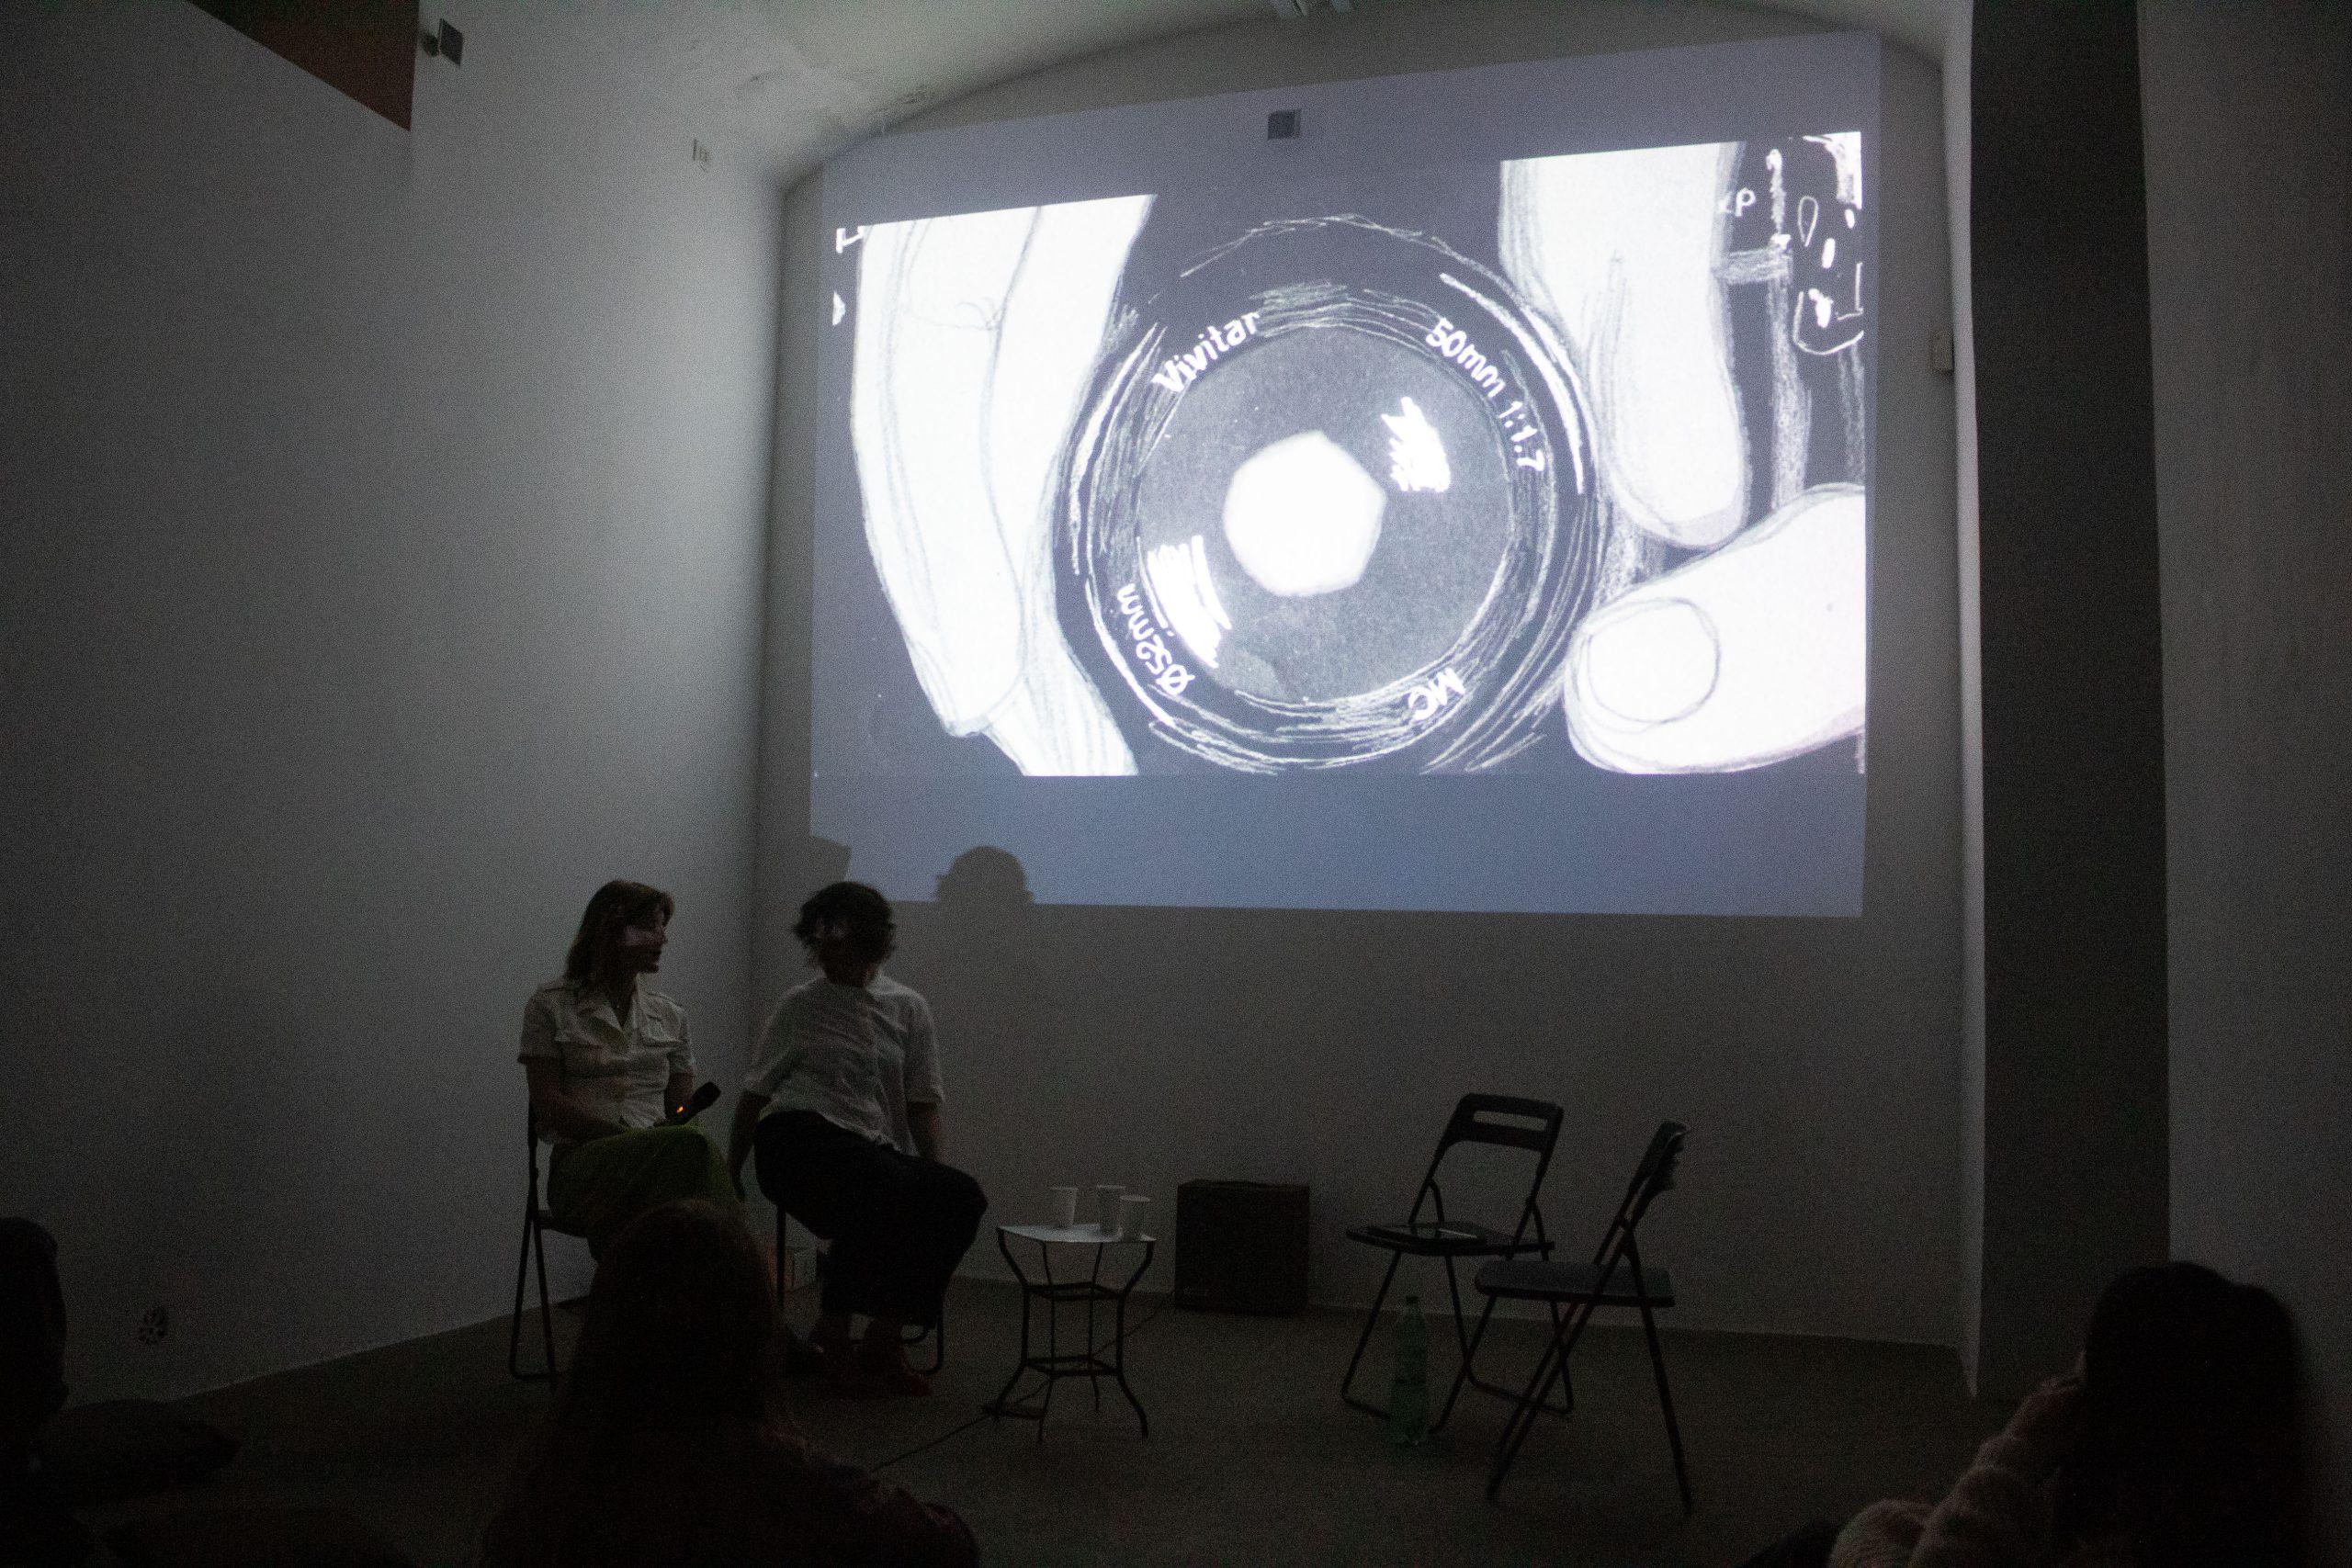 Catriona Gallagher in conversation with Léna Lewis-King and Luca Peretti, photo credits Silvia Calderoni, ©BSR